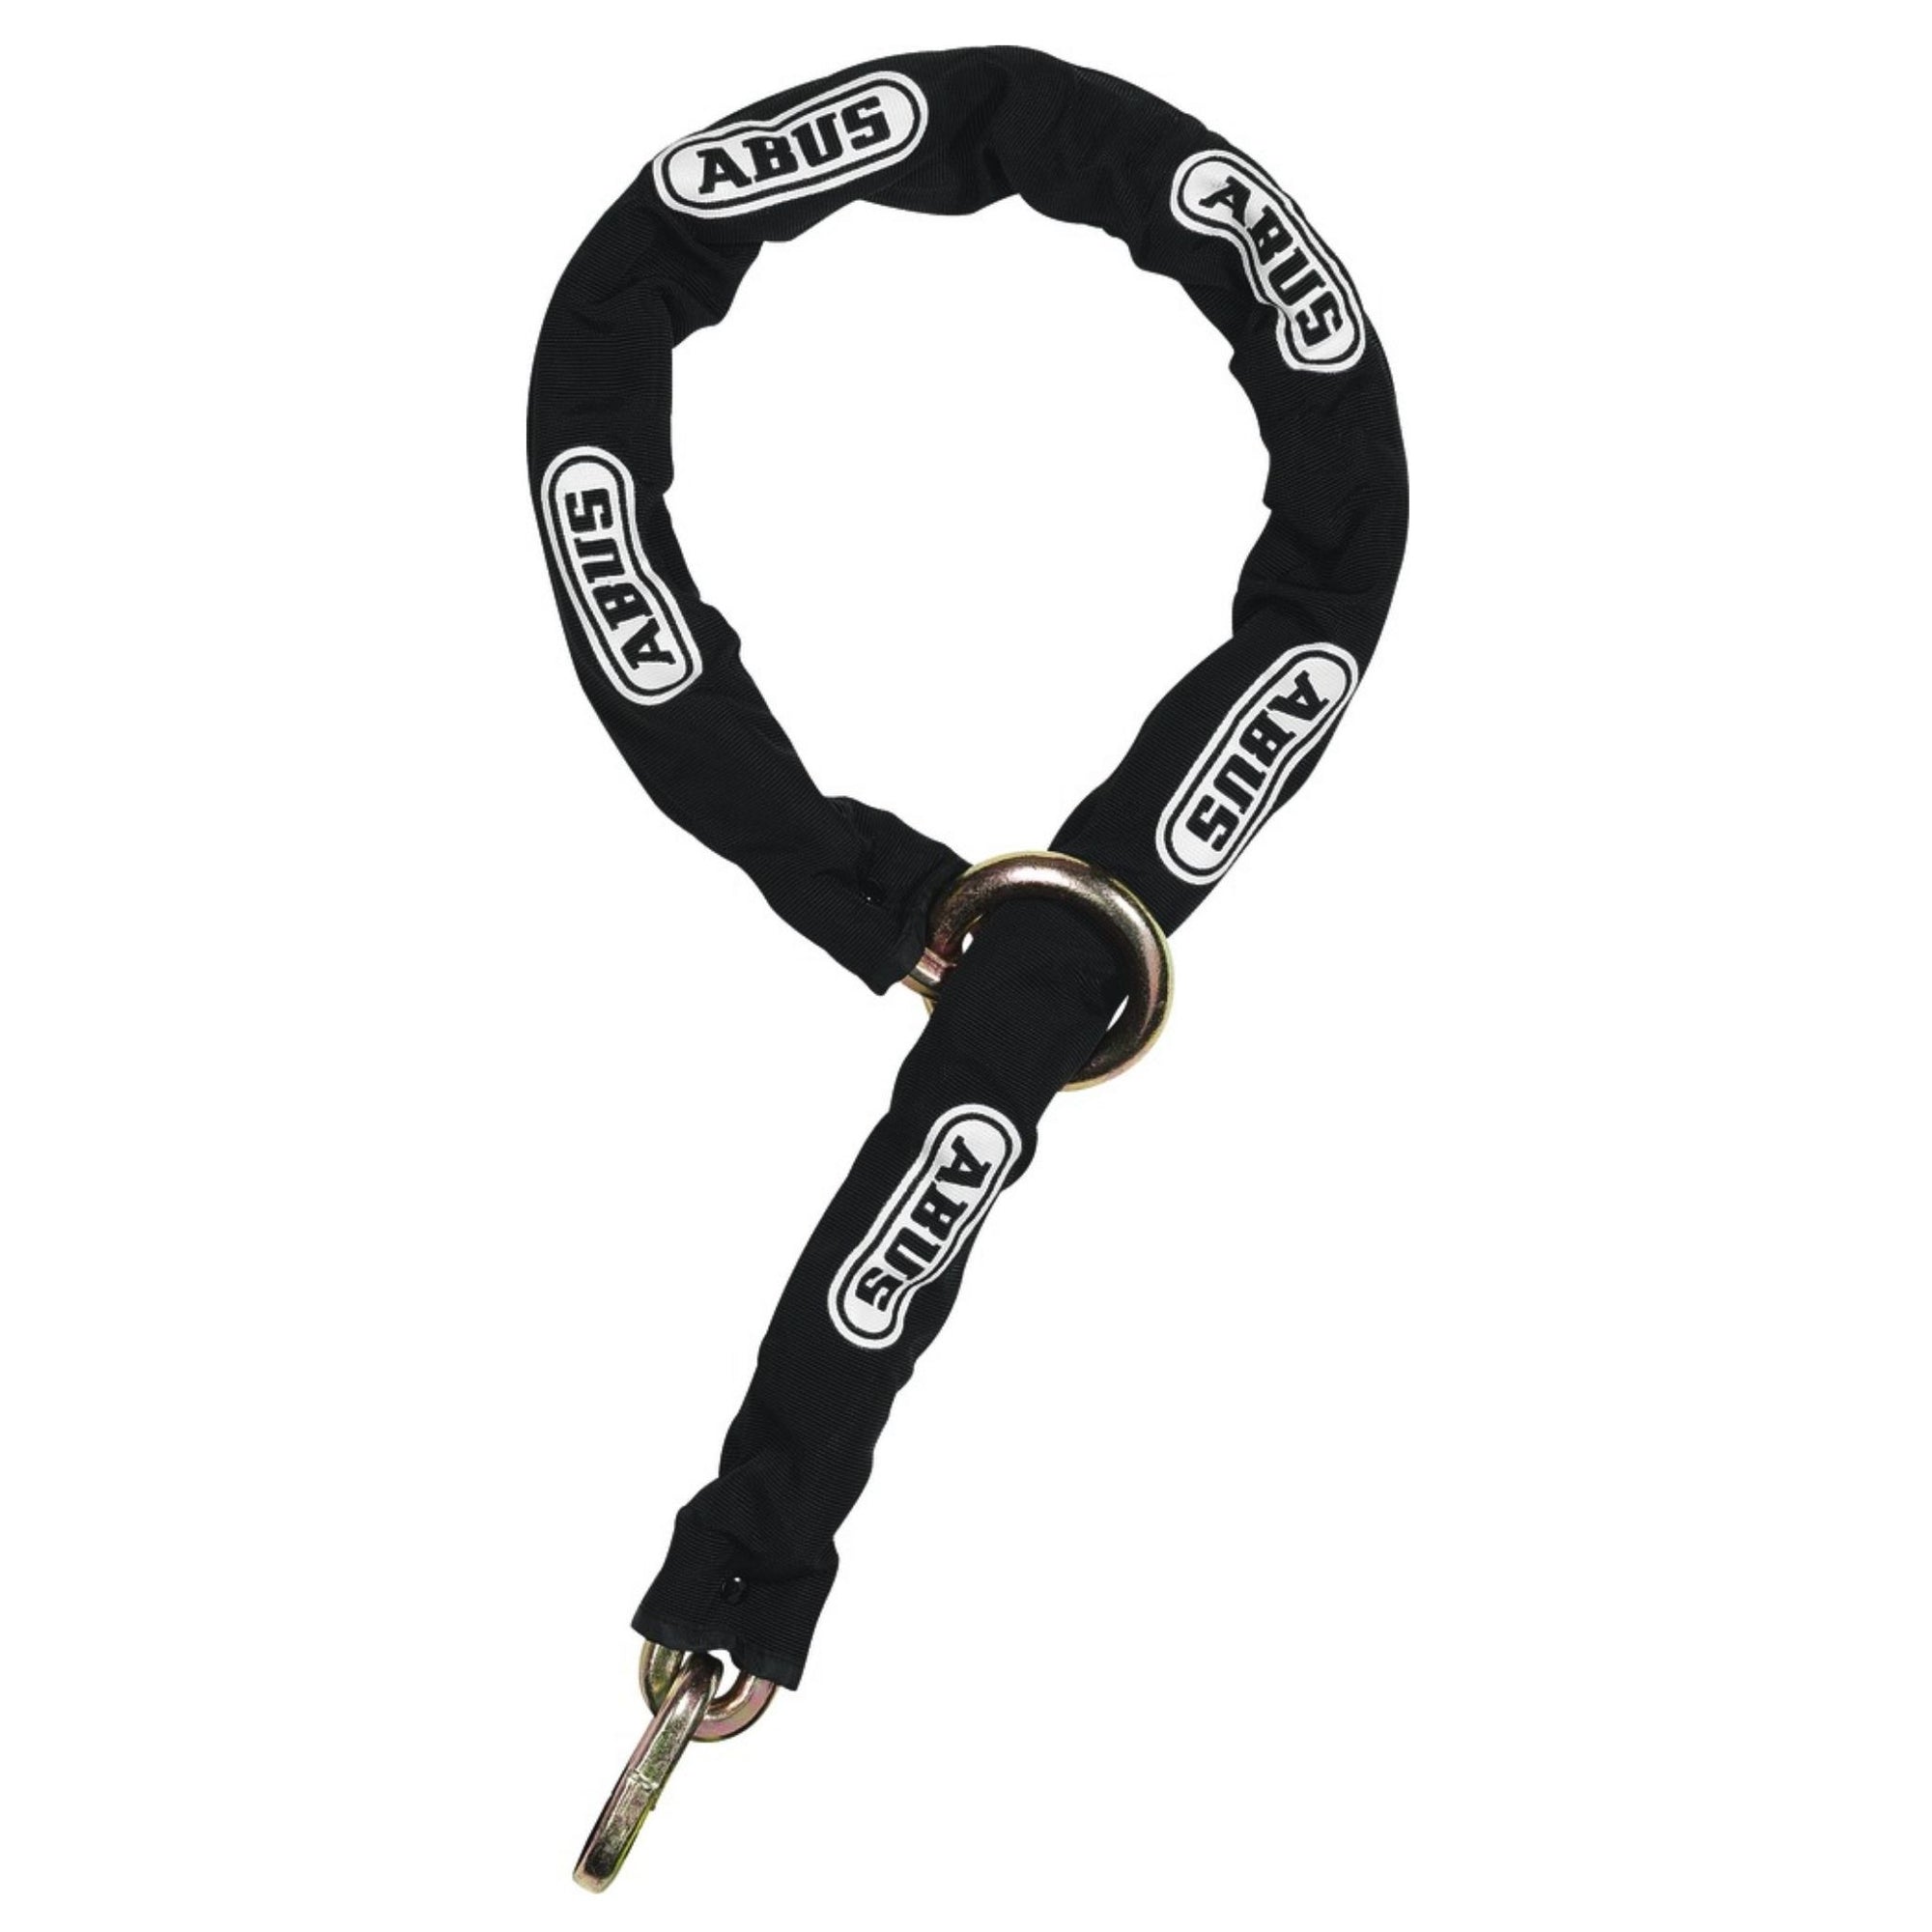 Abus 12KS Pre-Cut Loop Chains with Fitted Sleeve Available in 2.5', 4-Feet or 8-Foot Chain - The Lock Source